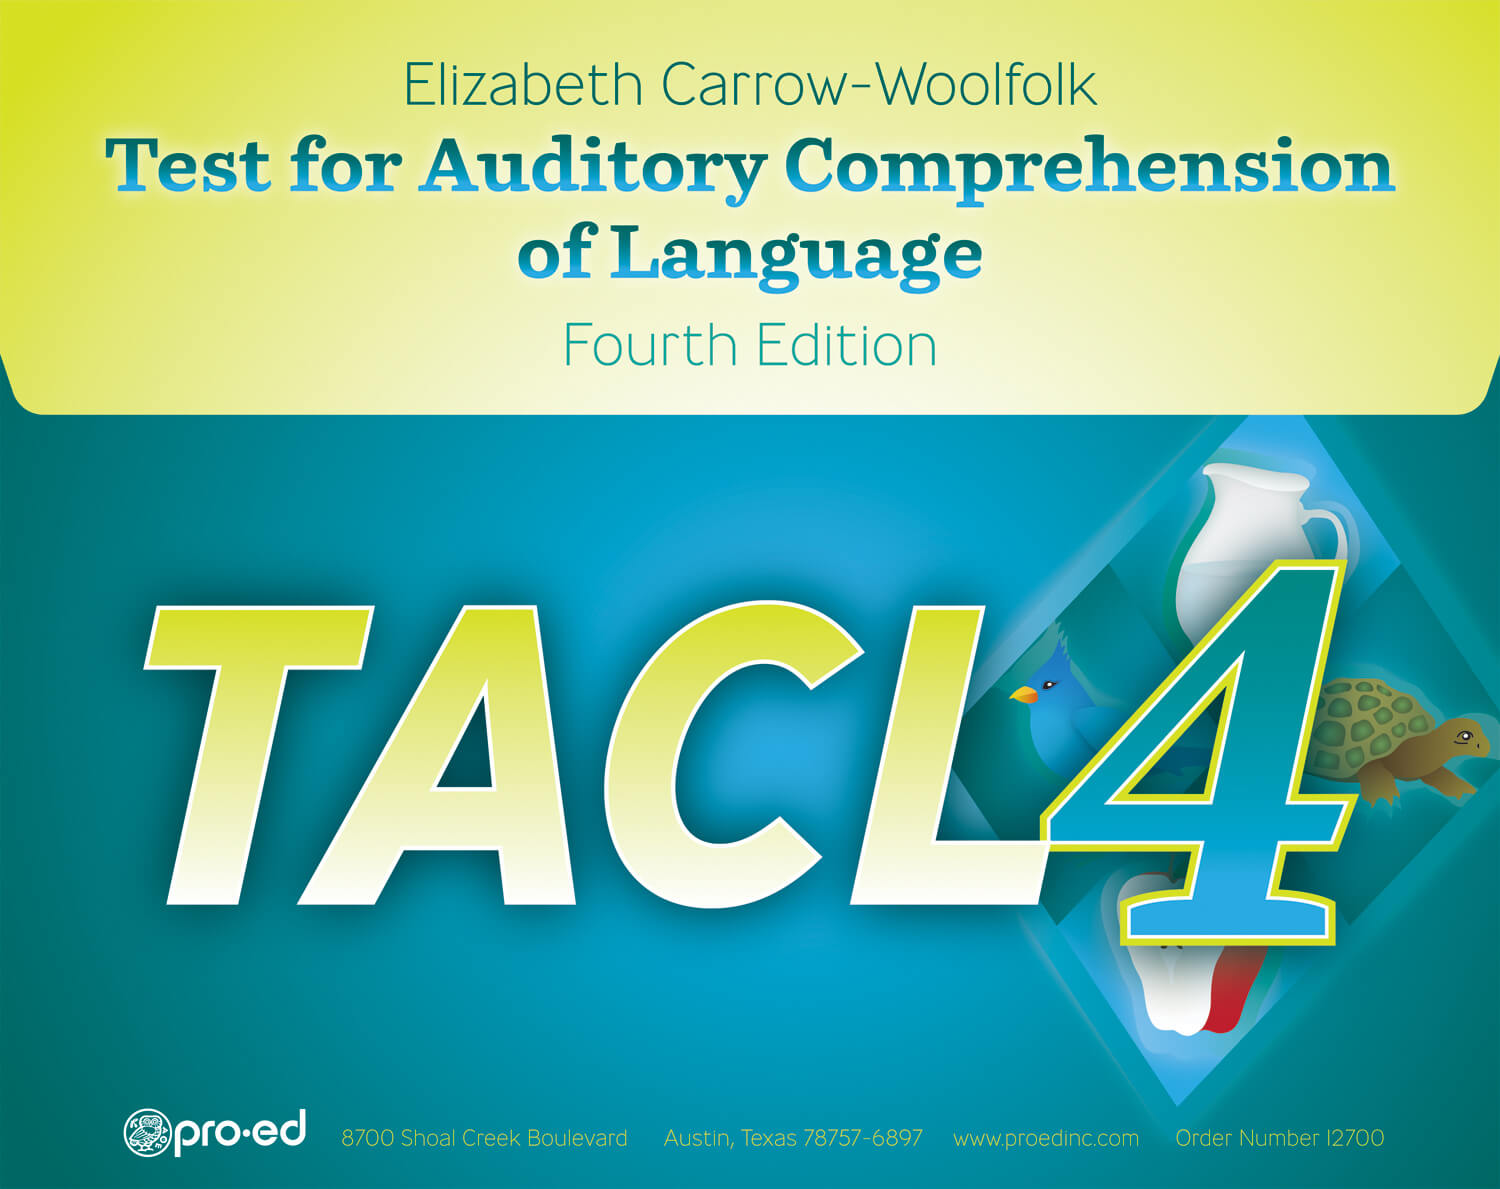 TACL–4: Test for Auditory Comprehension of Language 4th Ed - 